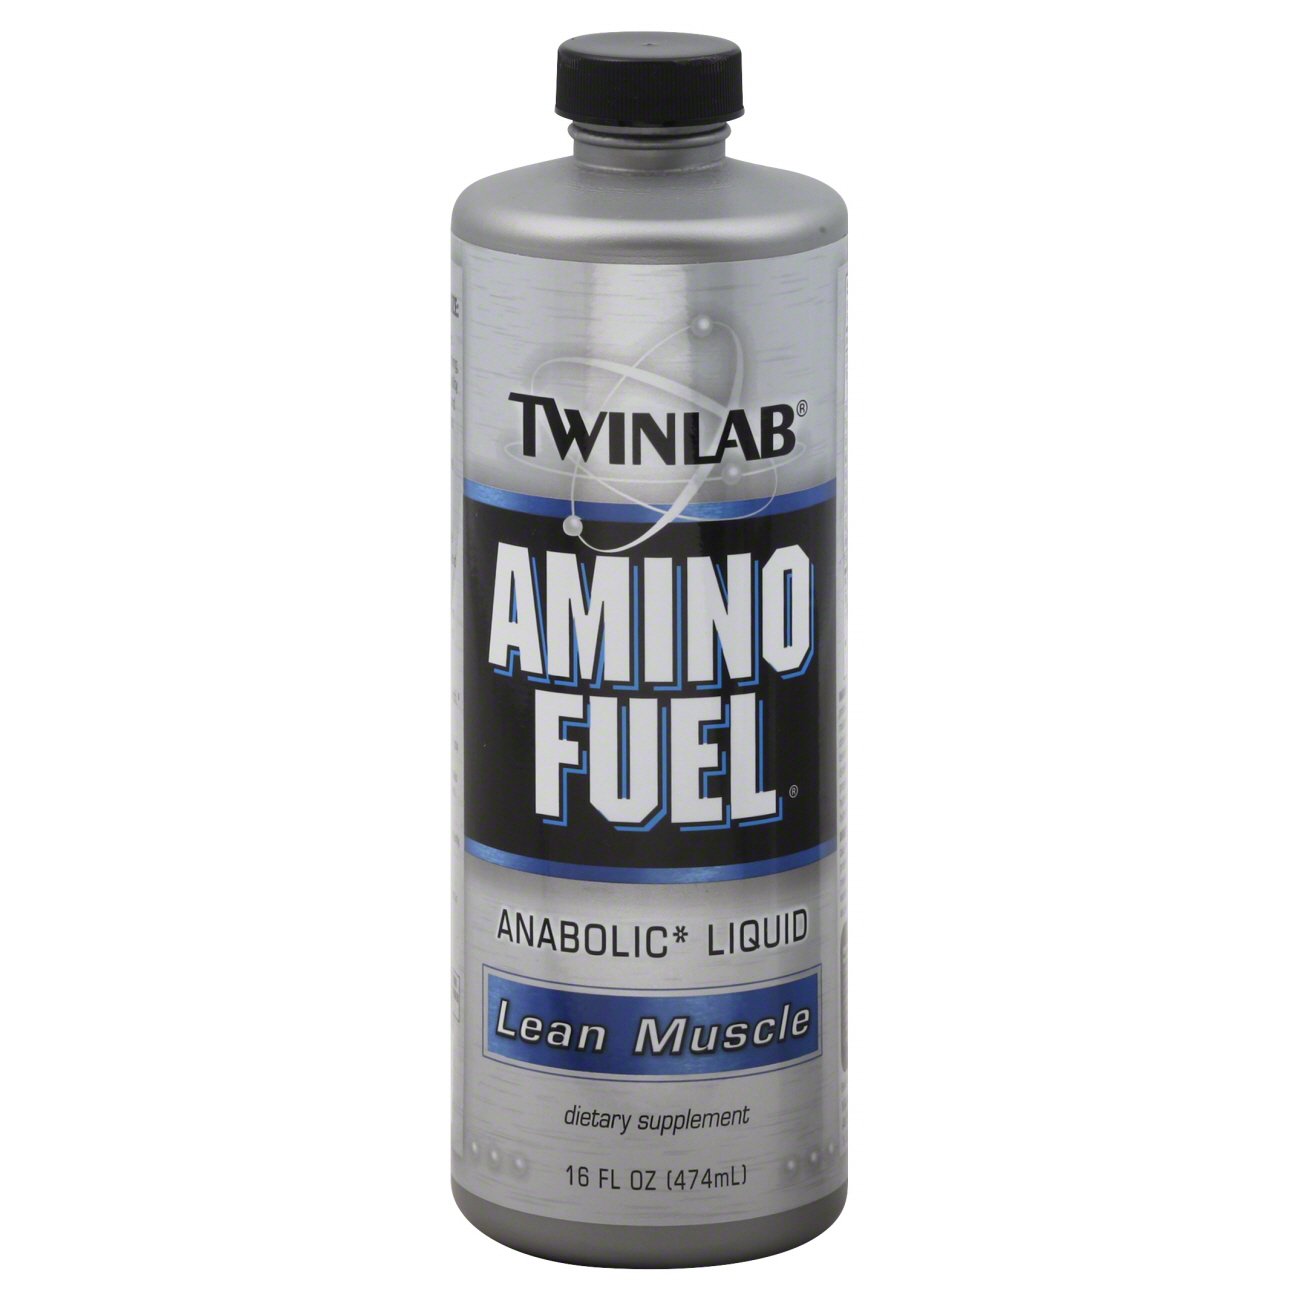 Twinlab Amino Fuel Lean Muscle Anabolic Liquid Shop Diet And Fitness At